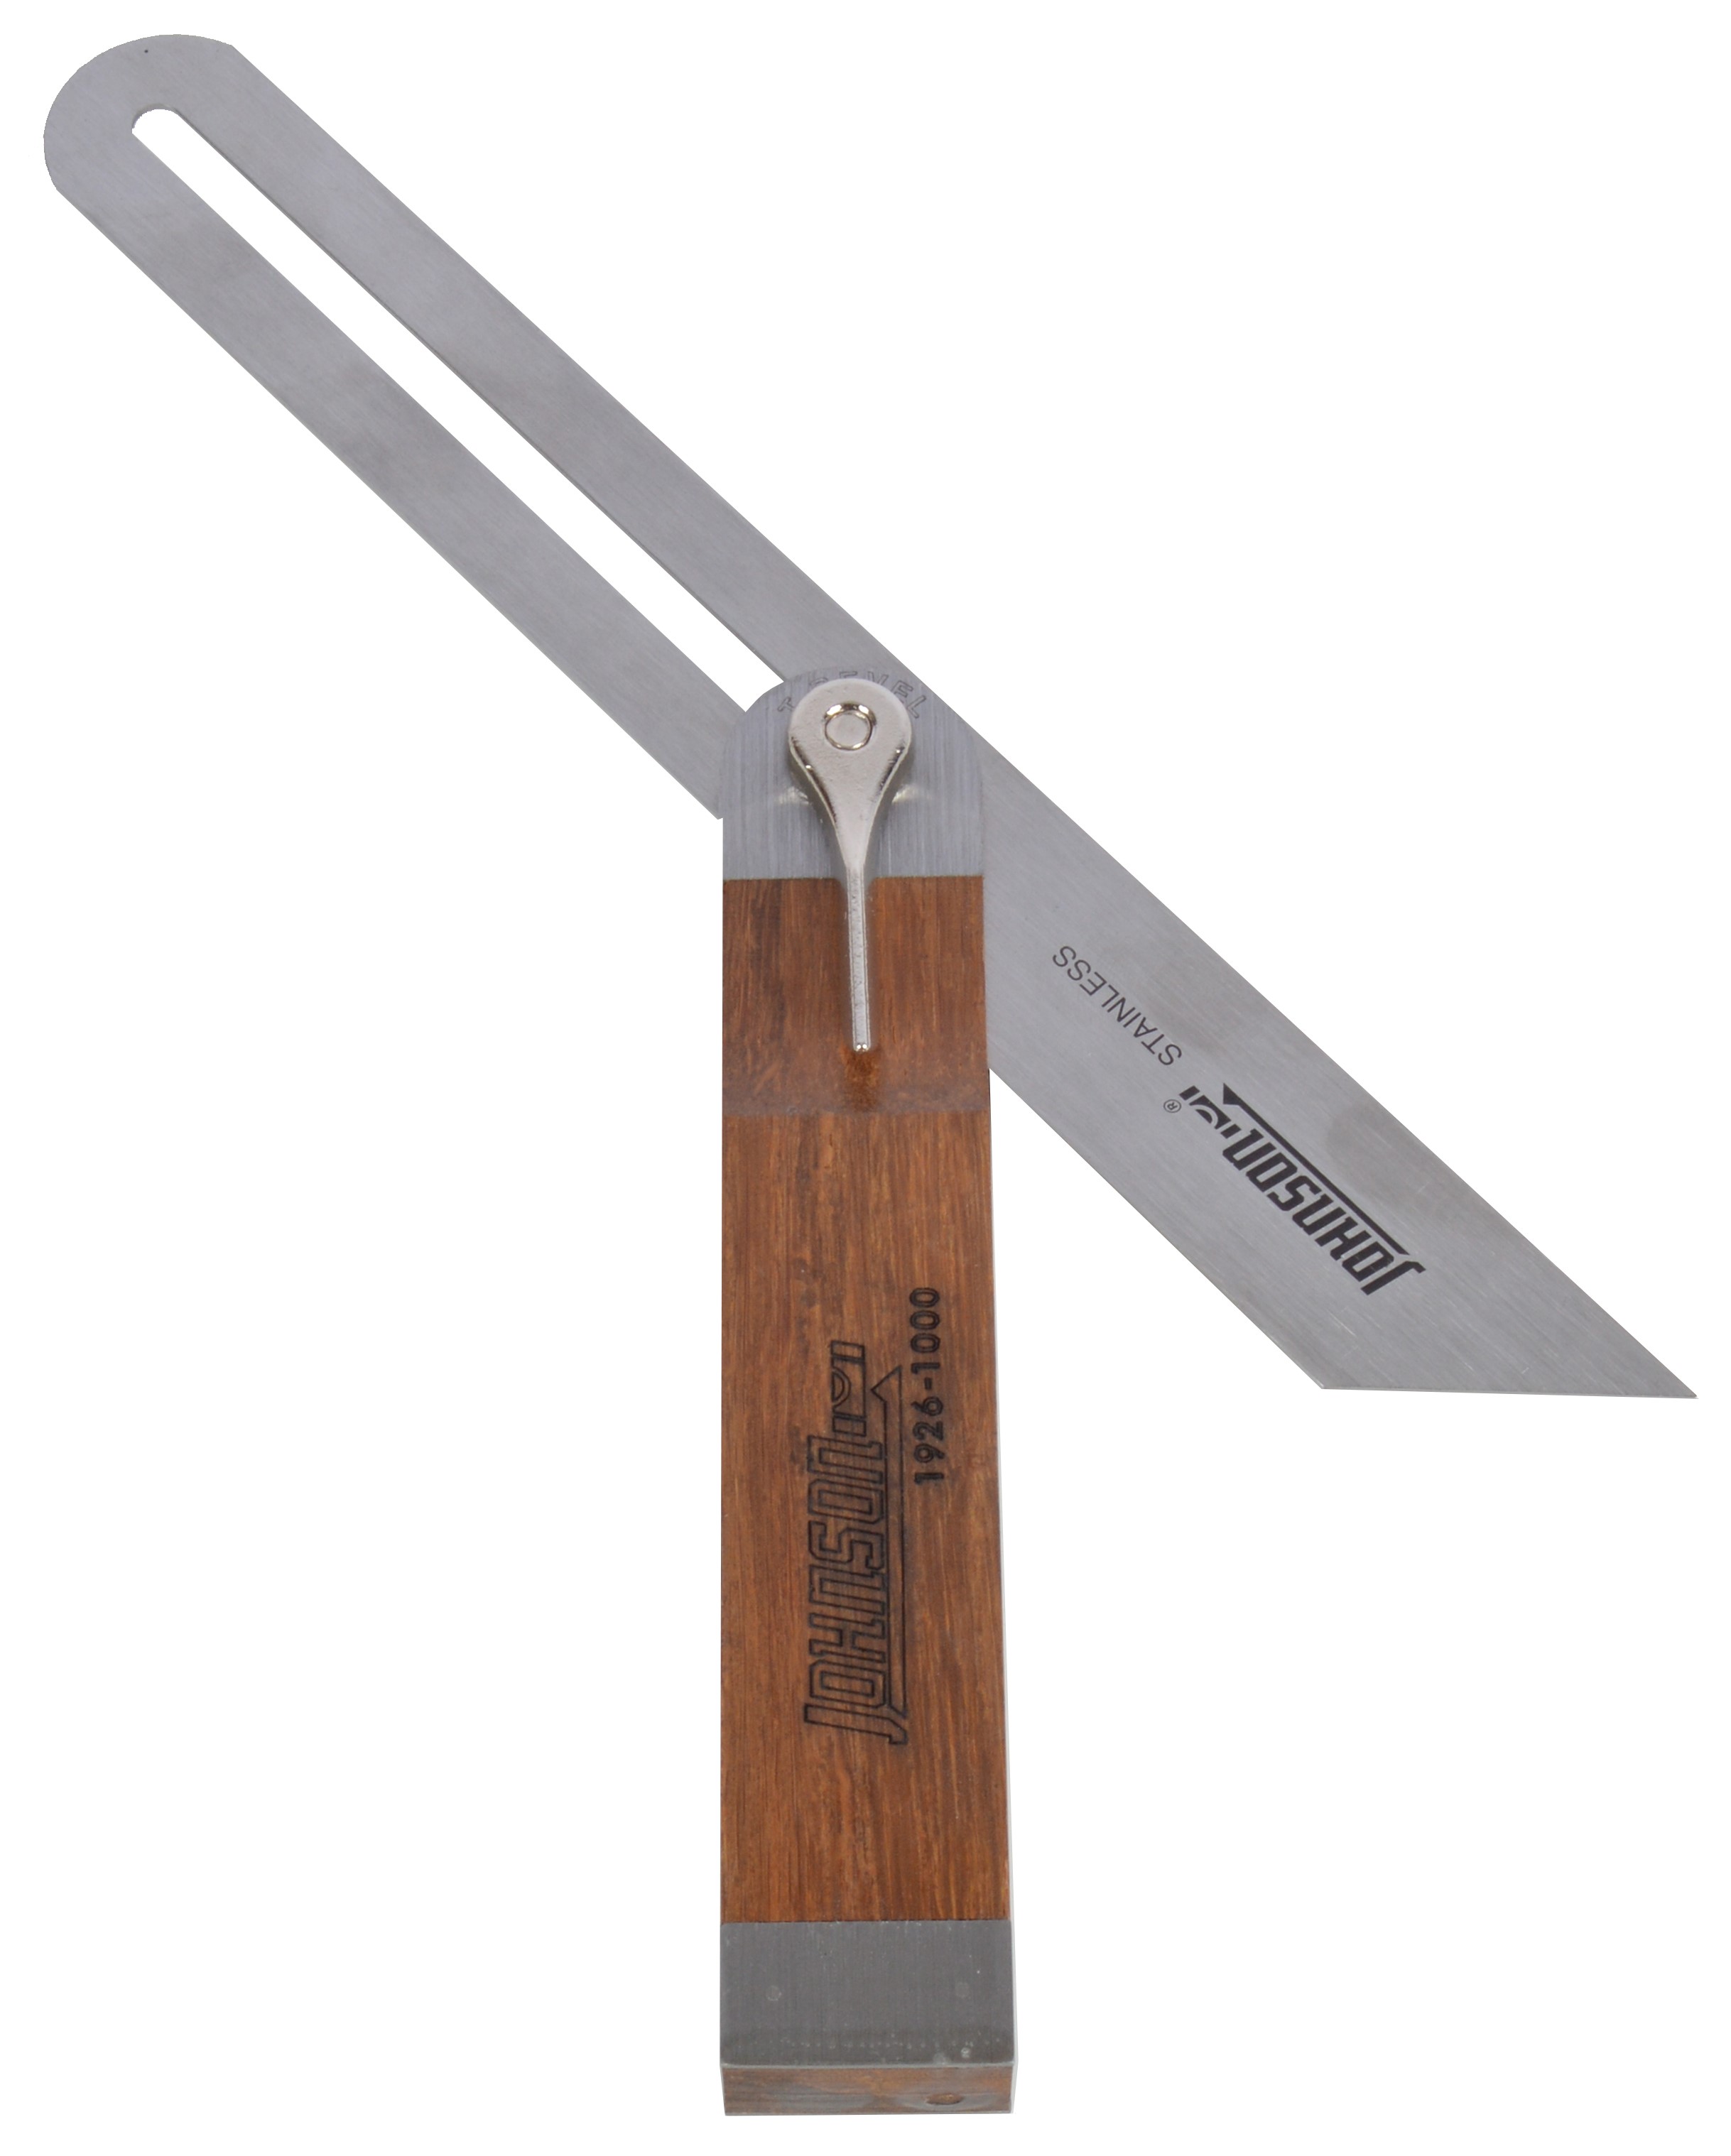 Johnson Level 1926-1000 10 In. Professional Carbonized Bamboo T-bevel